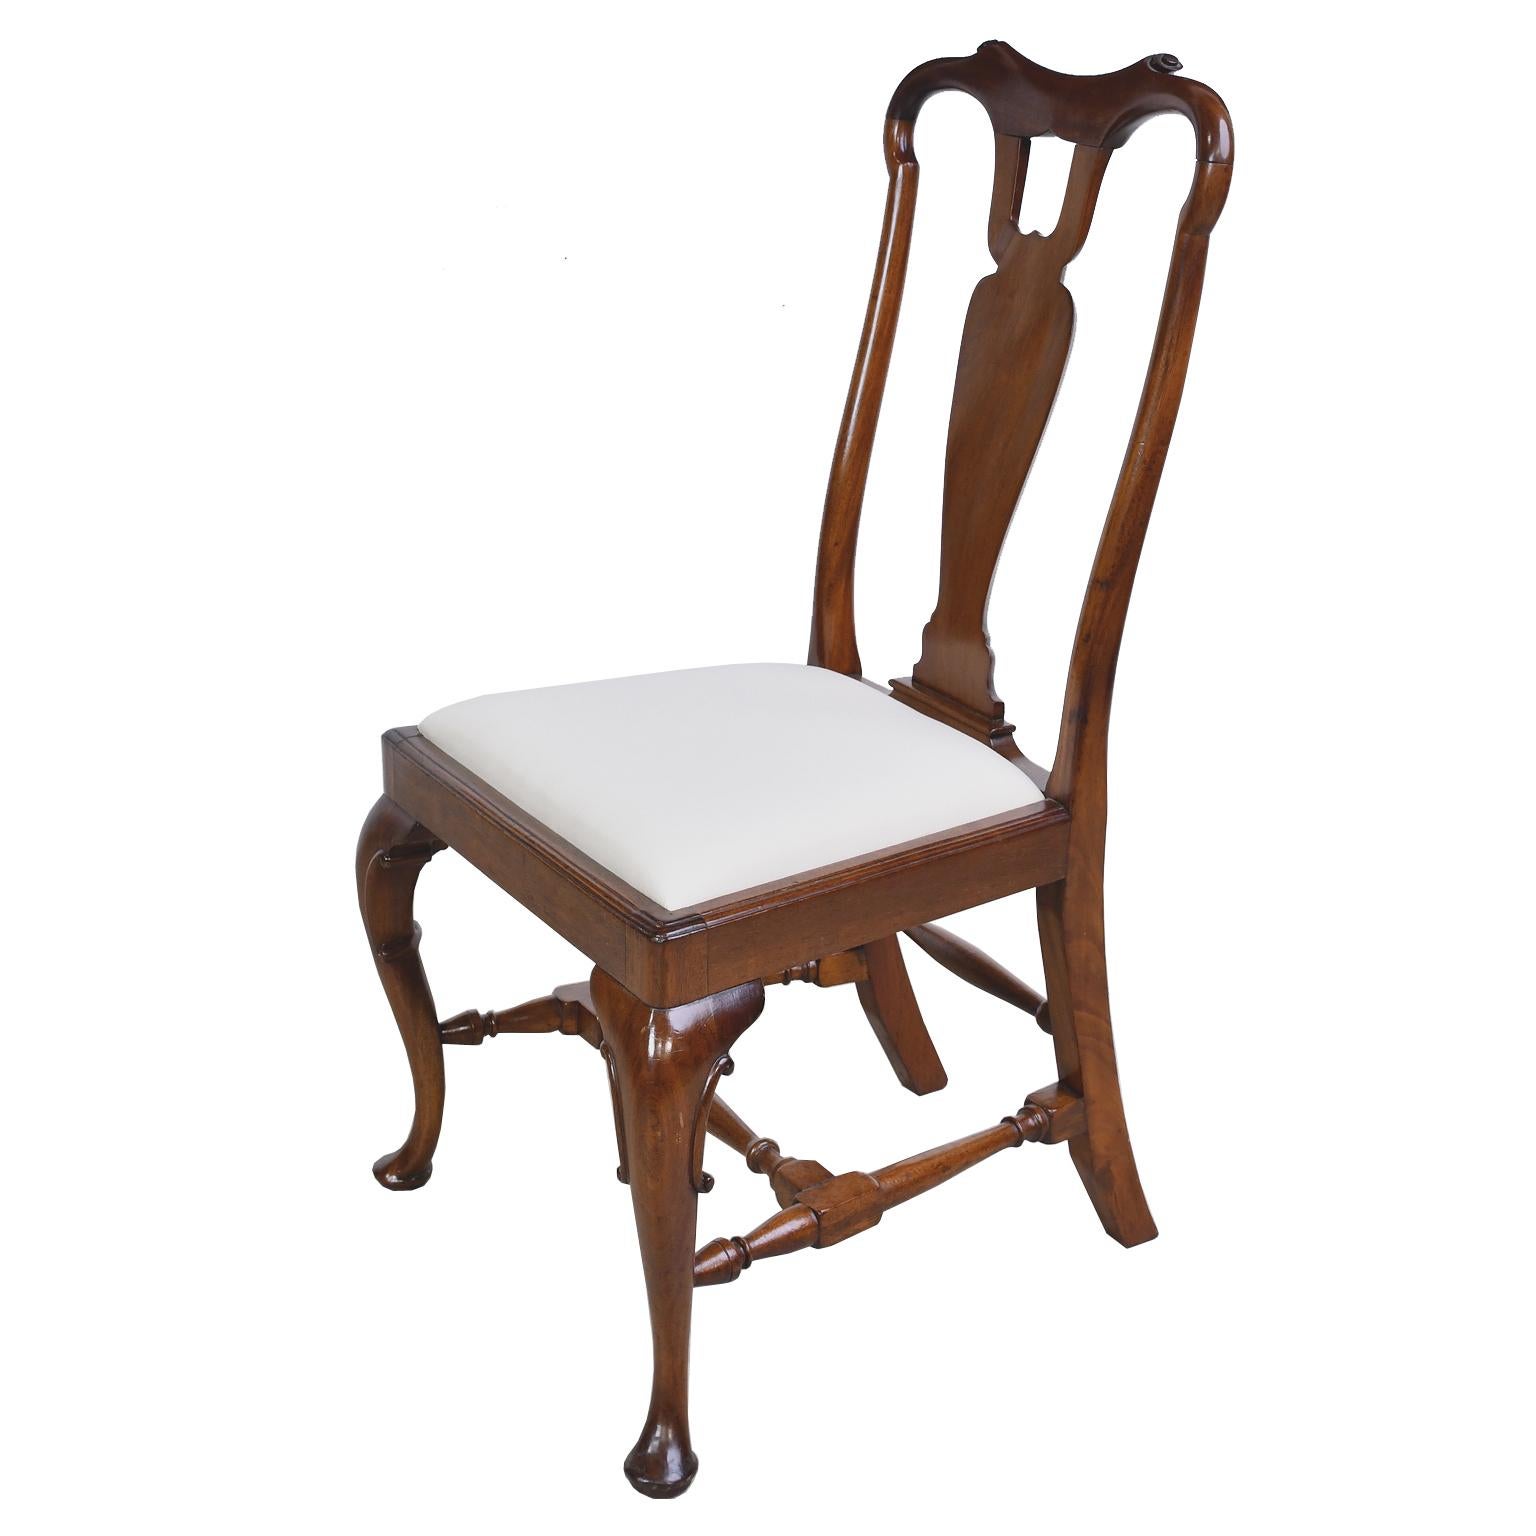 A very well-crafted American Centennial, Queen-Anne-style chair in mahogany with fiddle yoke-back, vase-shaped splat, cabriole front legs with padded Dutch feet, splayed back legs, and four turned stretchers, circa 1880. Frame was restored in our